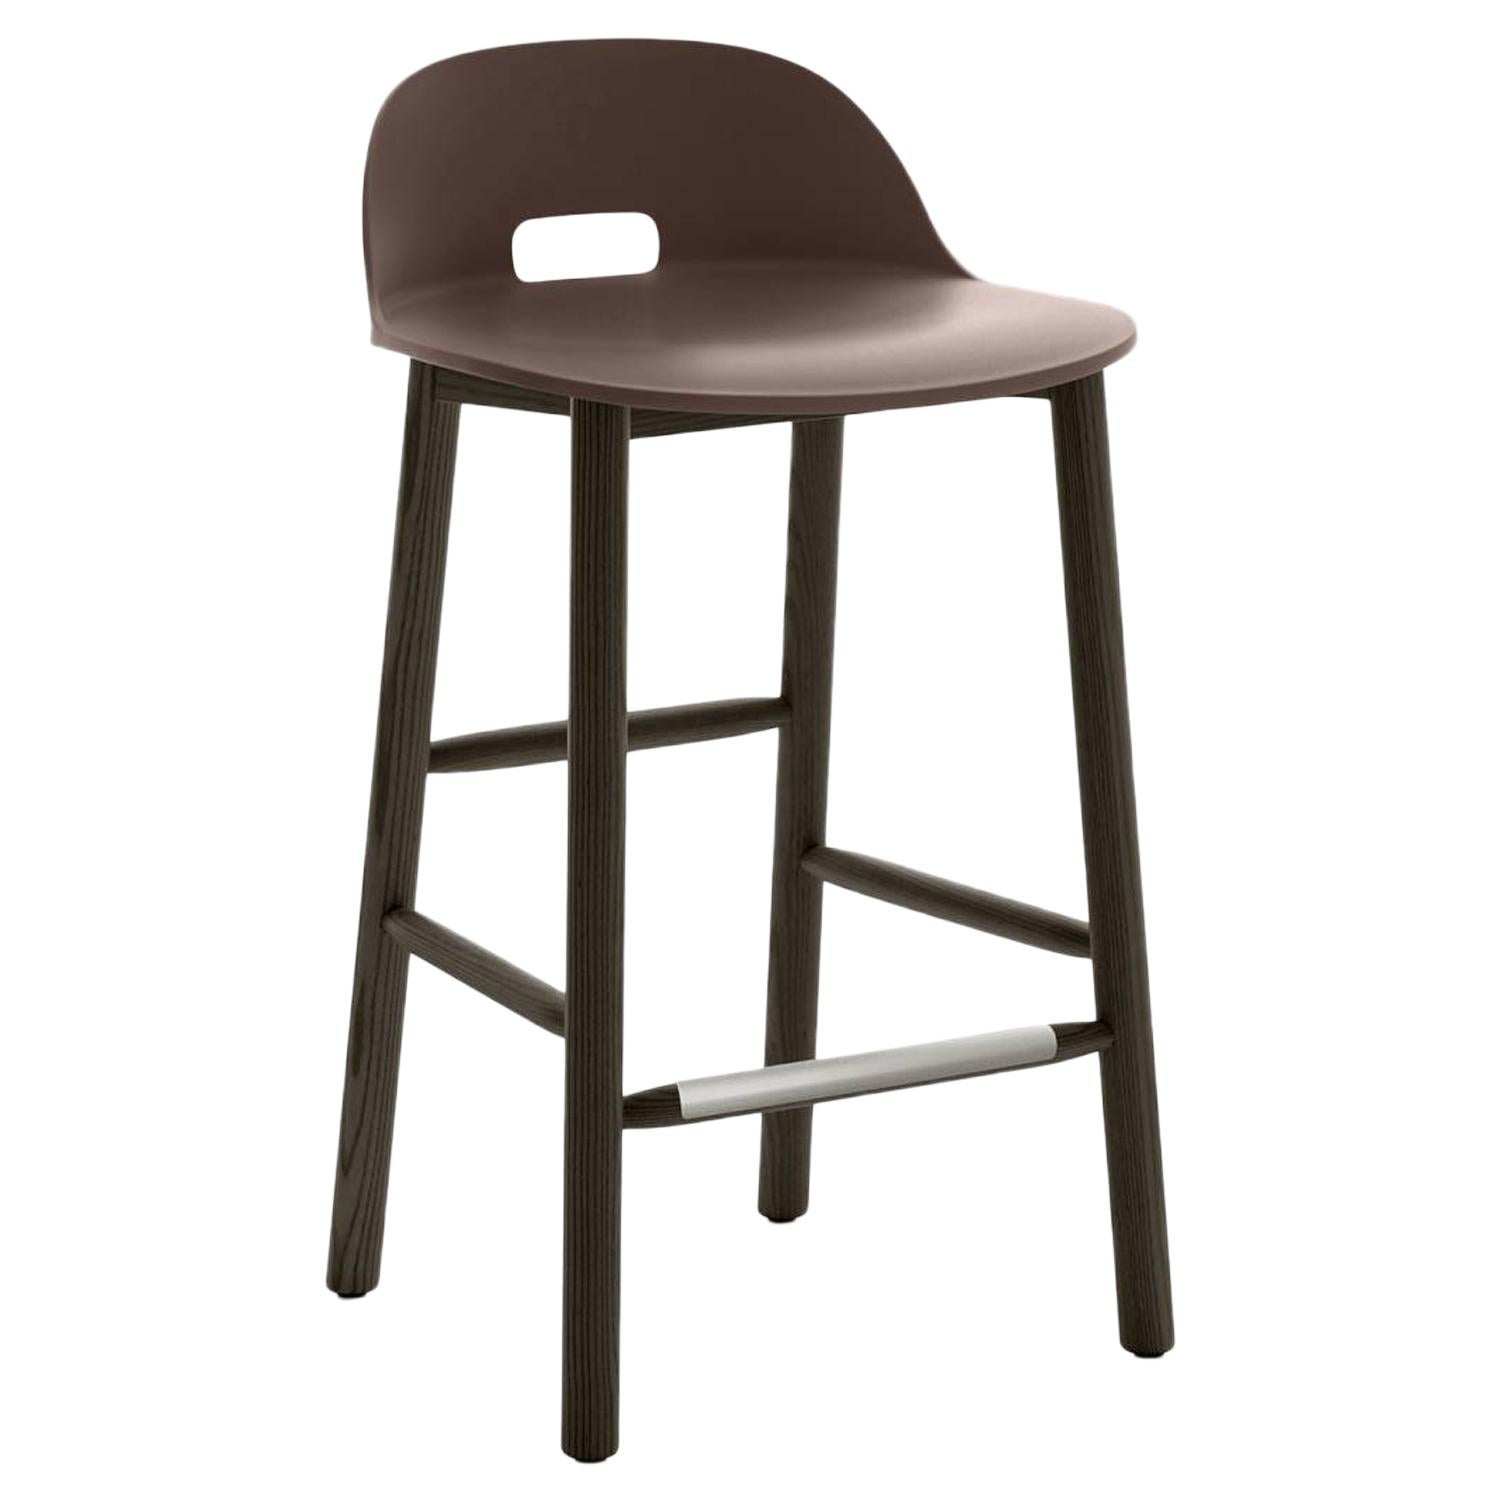 Emeco Alfi Counter Stool in Brown and Dark Ash with Low Back by Jasper Morrison